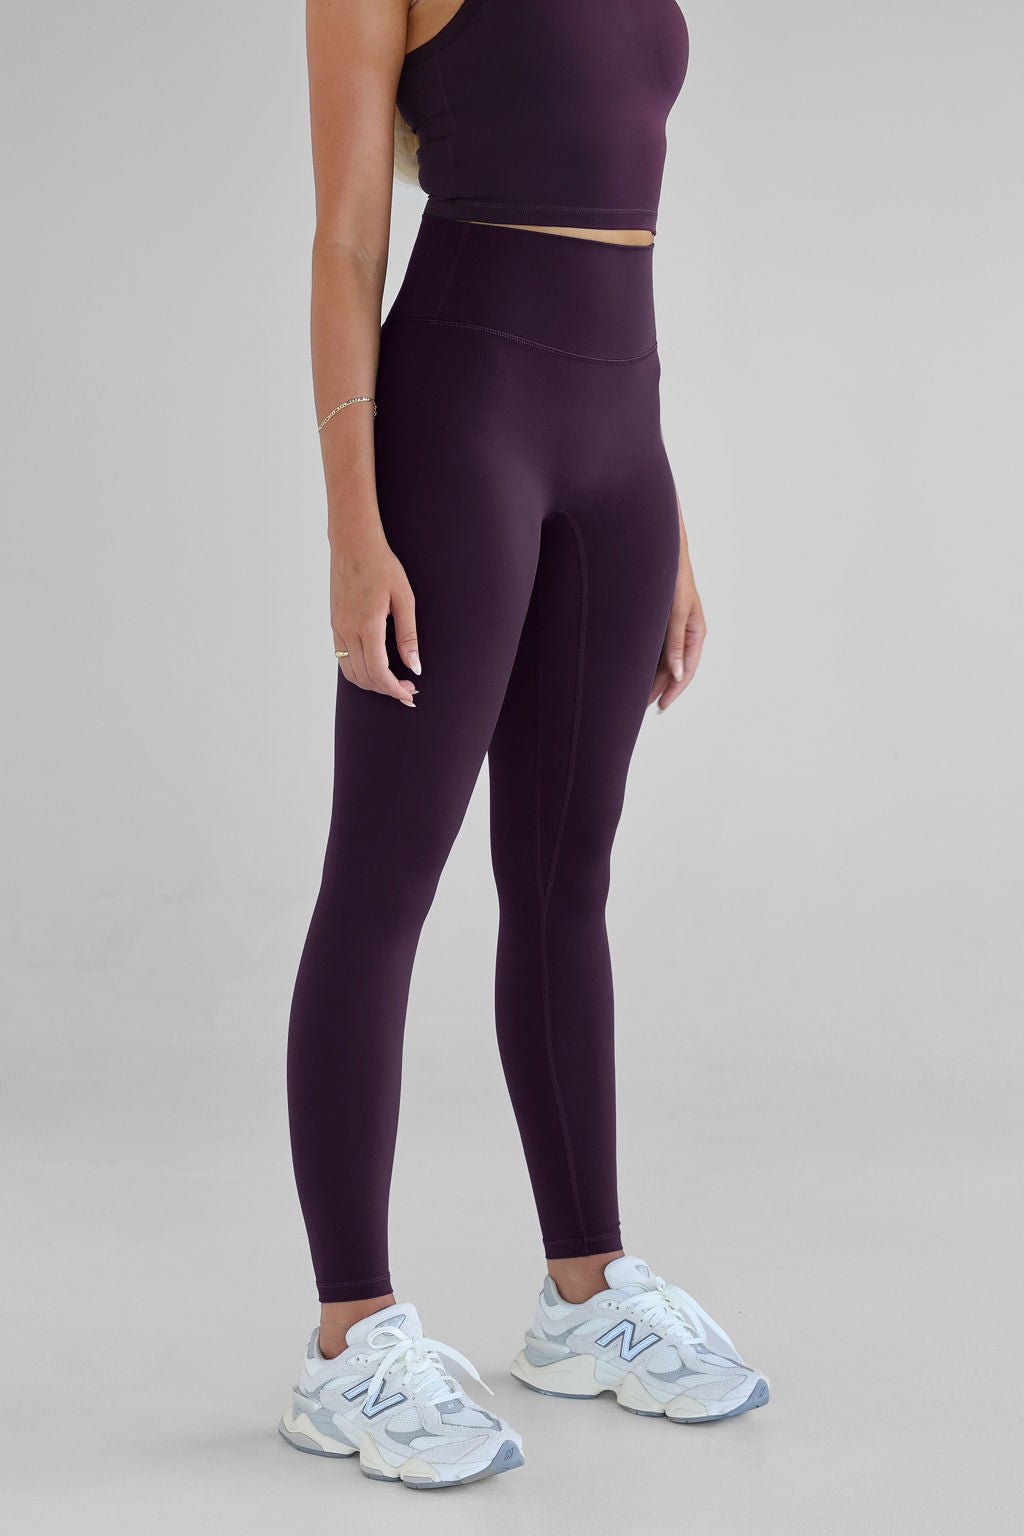 Signature Full Length Leggings - Plum SHIPPING FROM 12/02 - LEELO ACTIVE